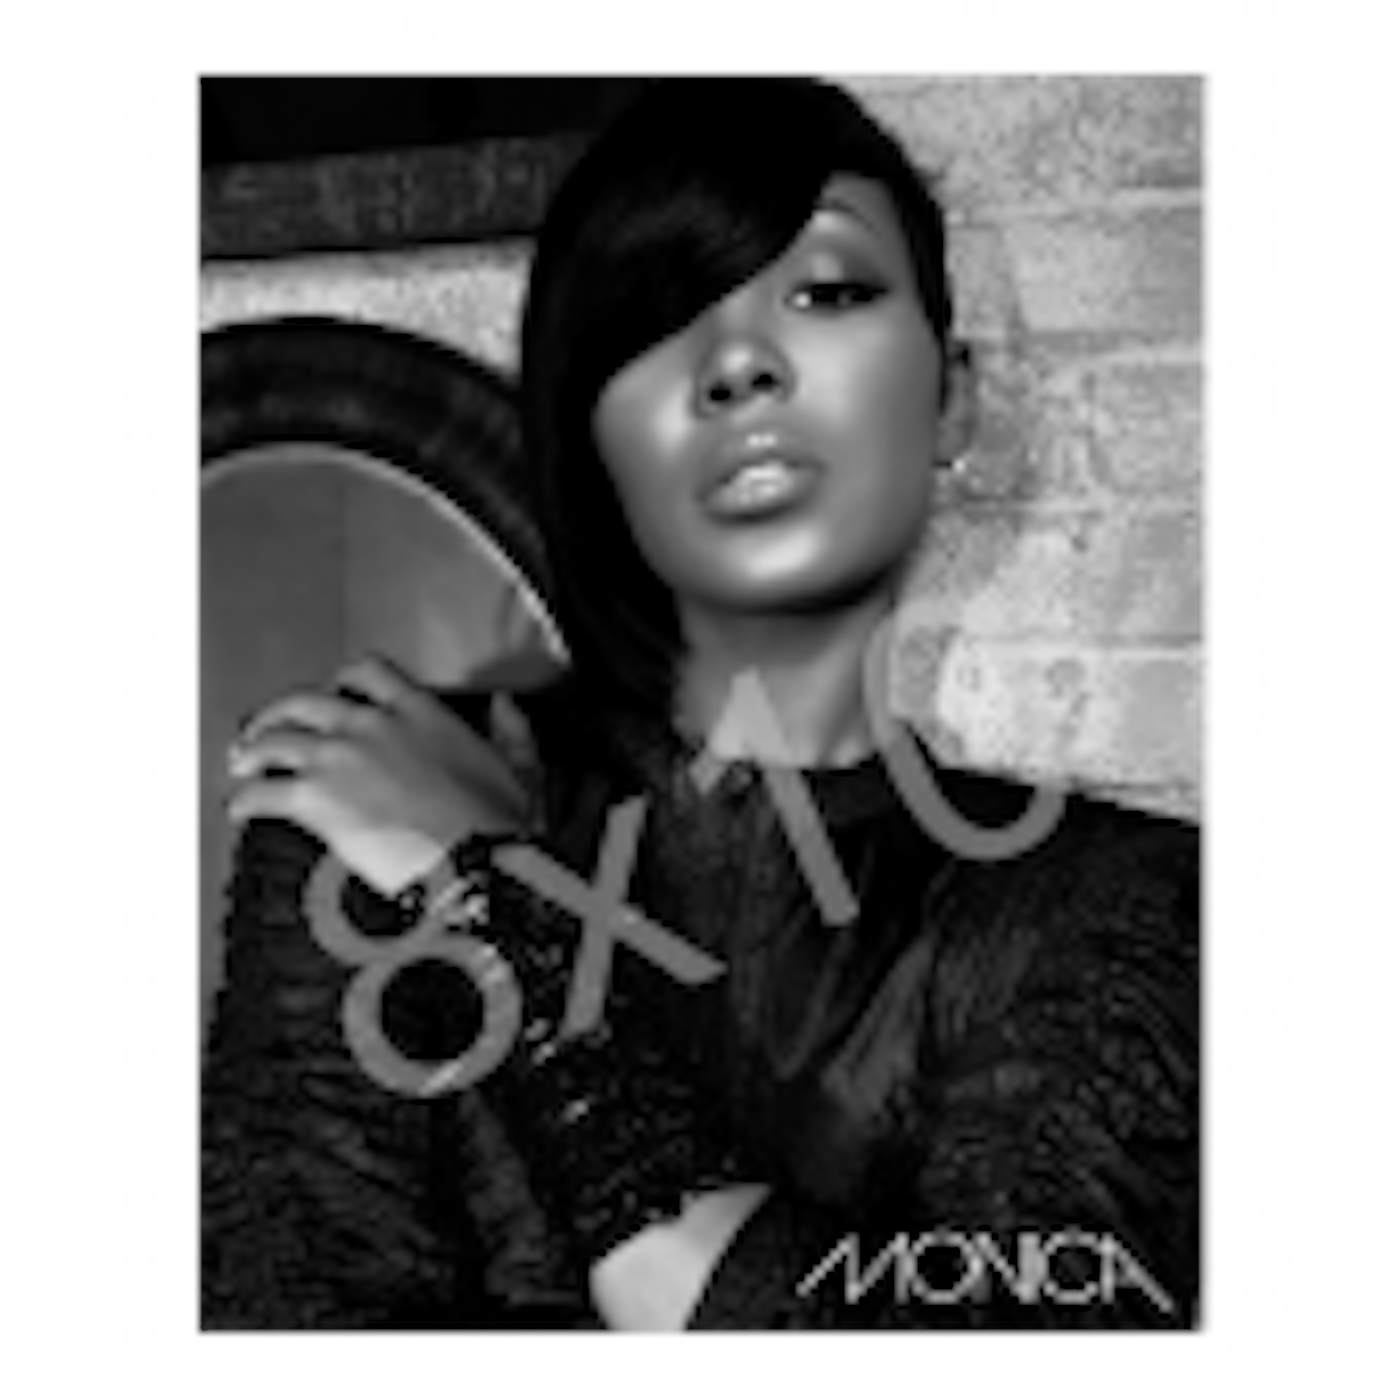 Monica 8x10- Black and White photo-- Available Autographed! -